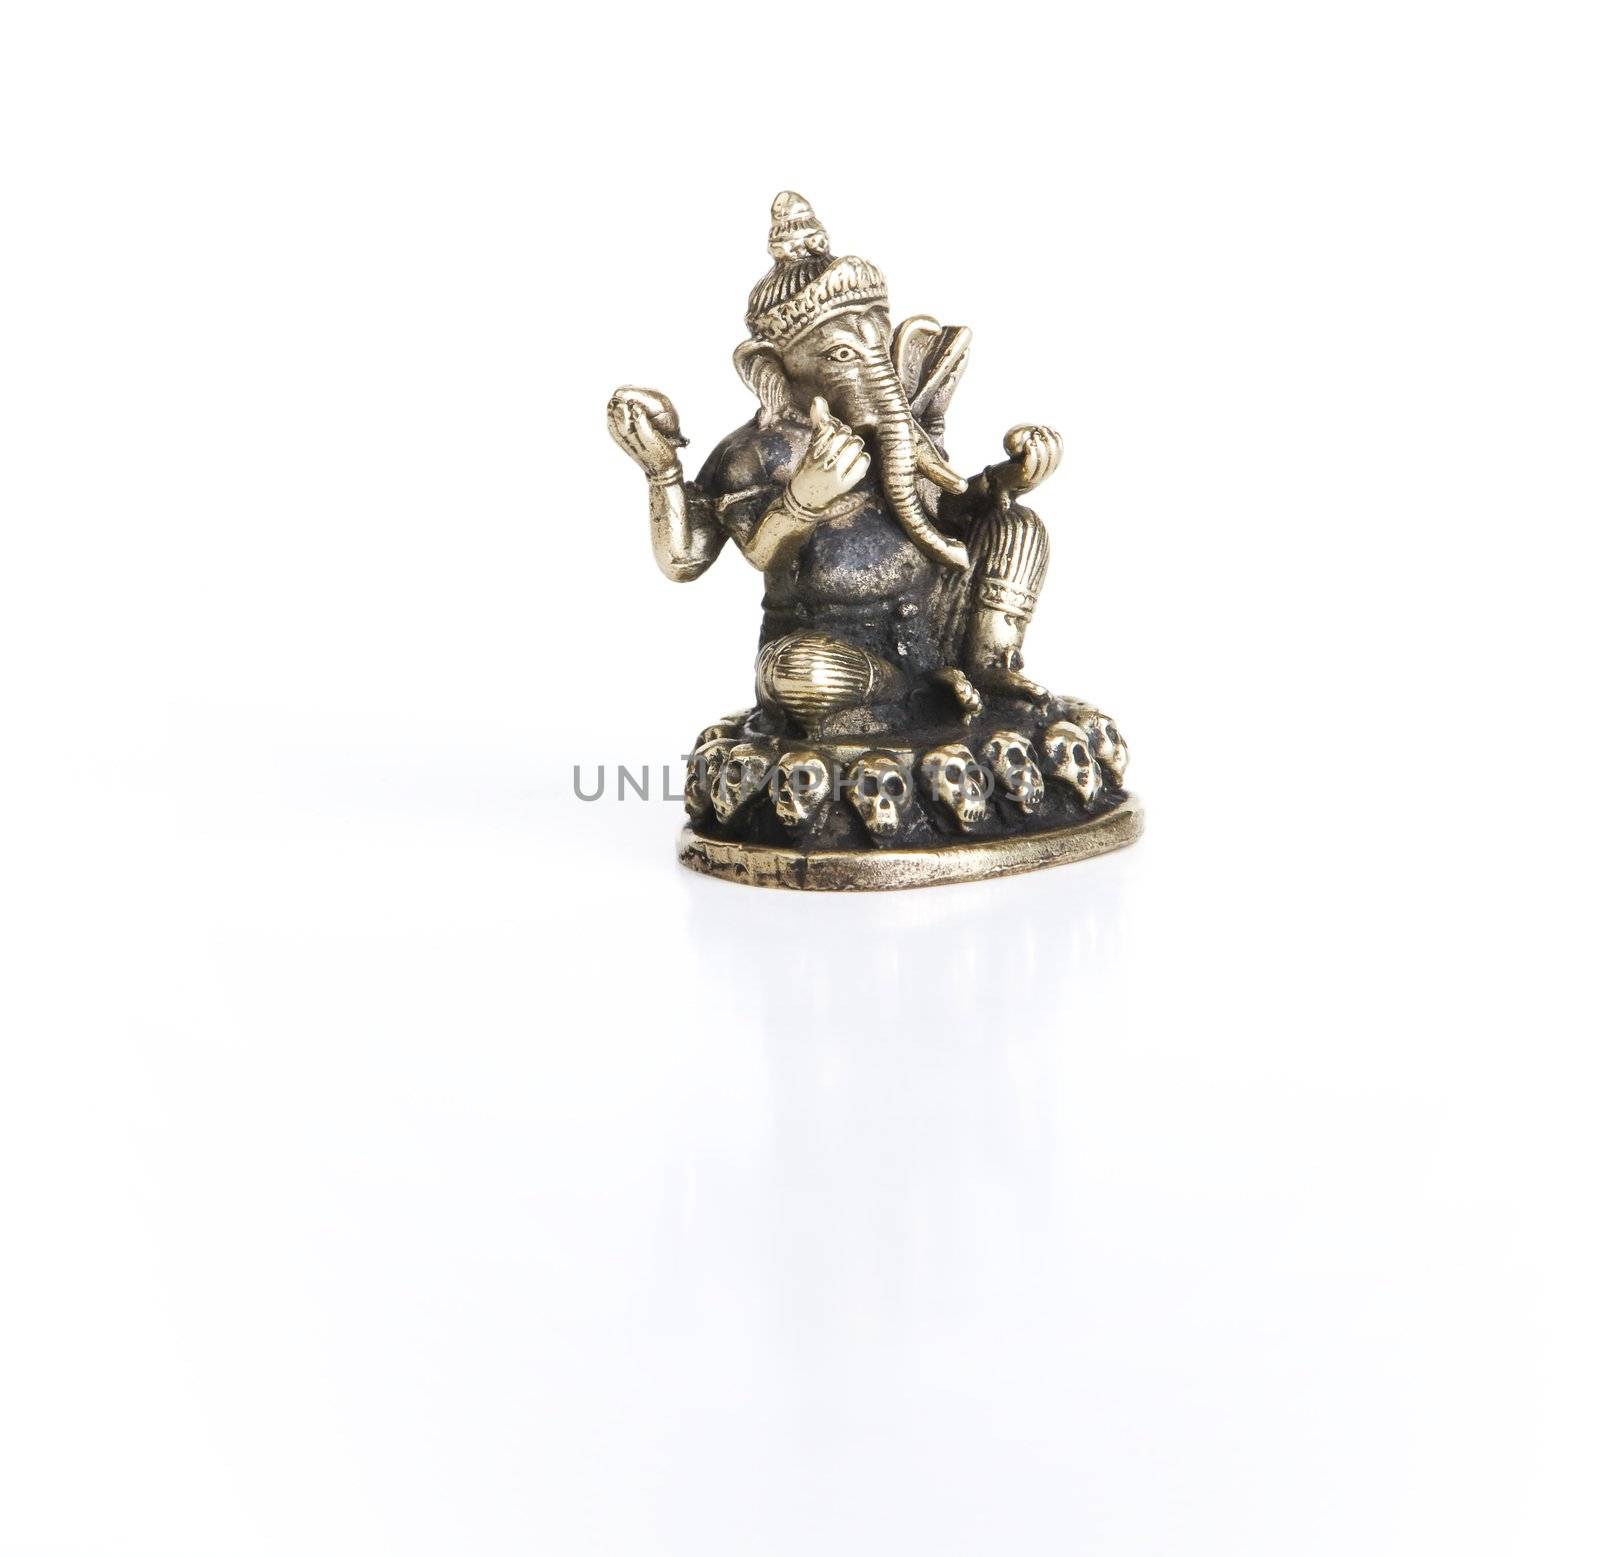 Bronze Ganesh Statue Isolated on a White Background